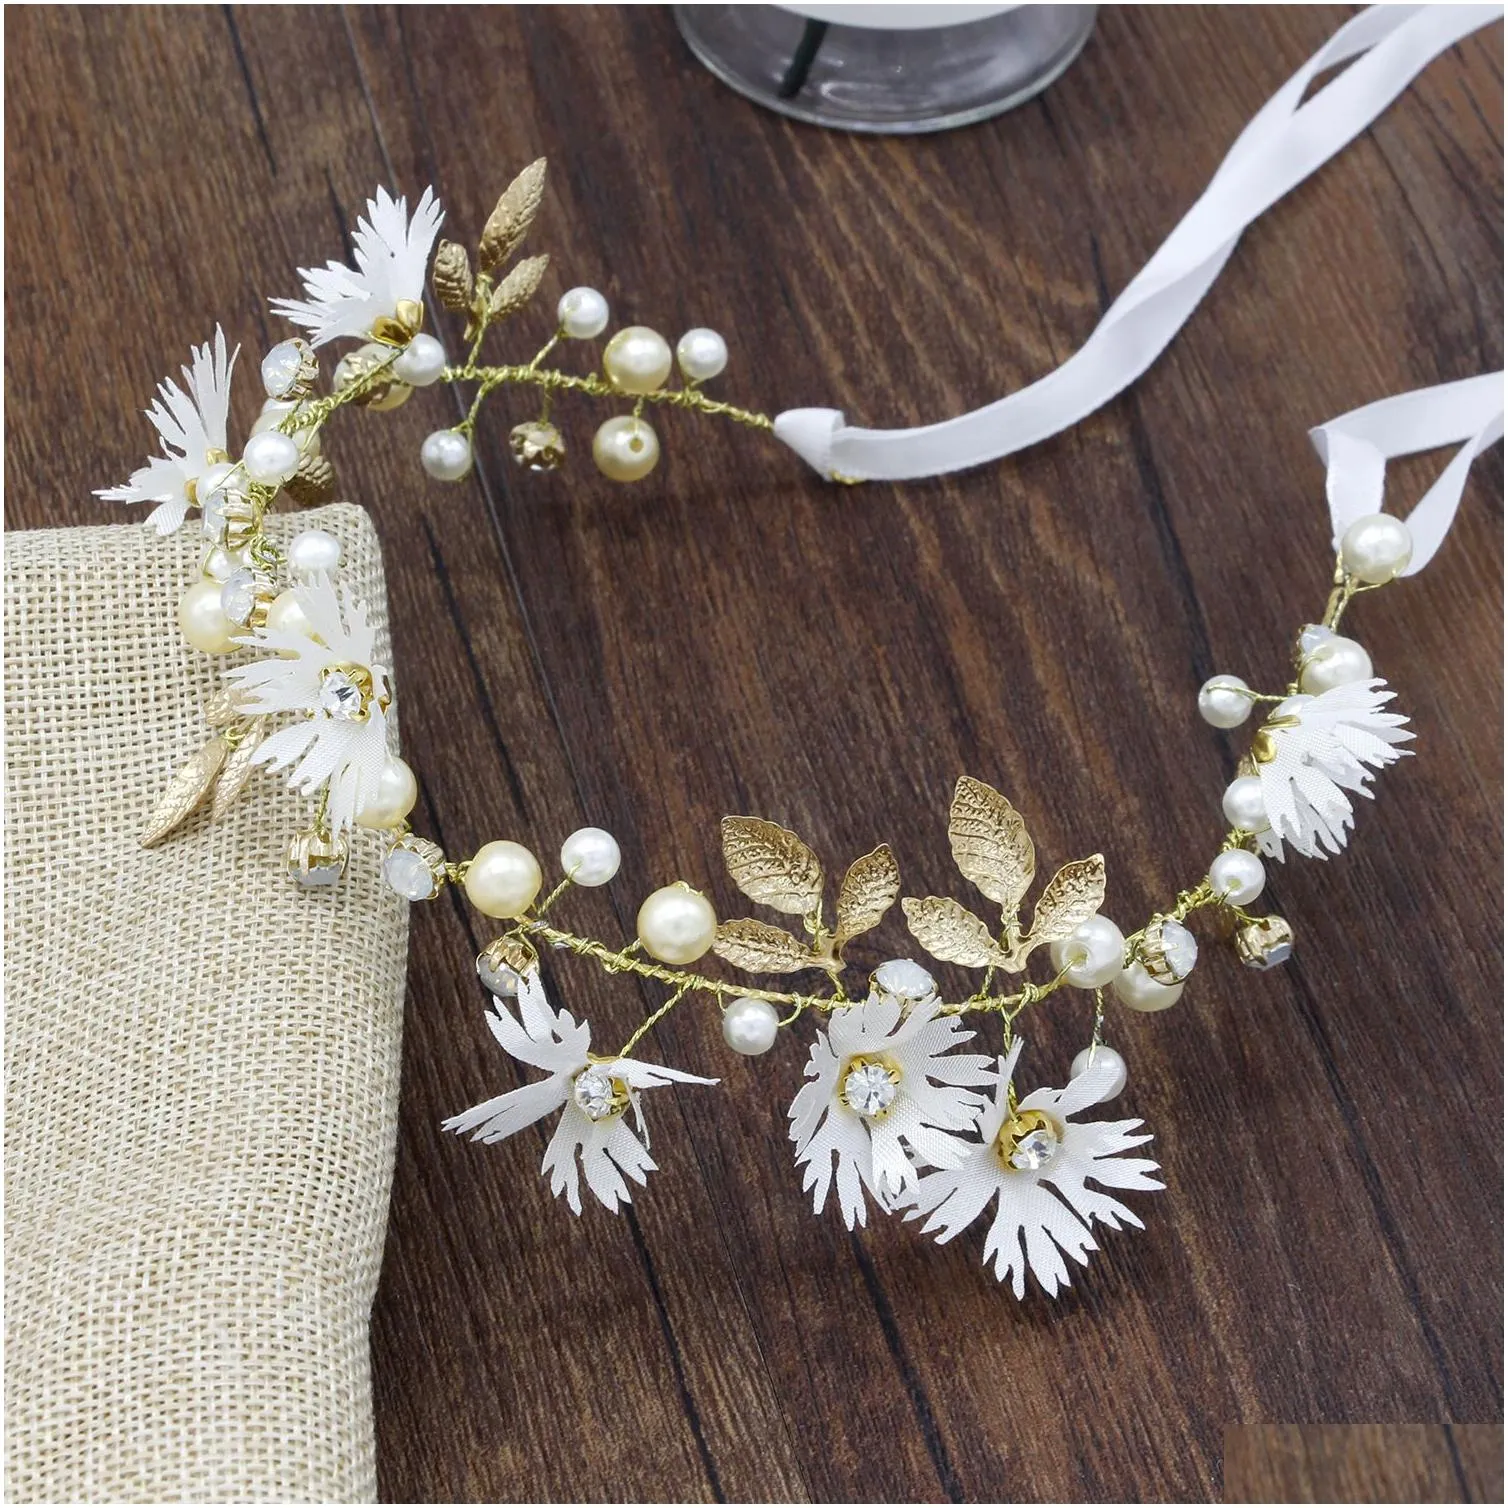 Children daisy beaded crown fashion hand made ribbon garlands jewelry photography girls hair accessories A6650